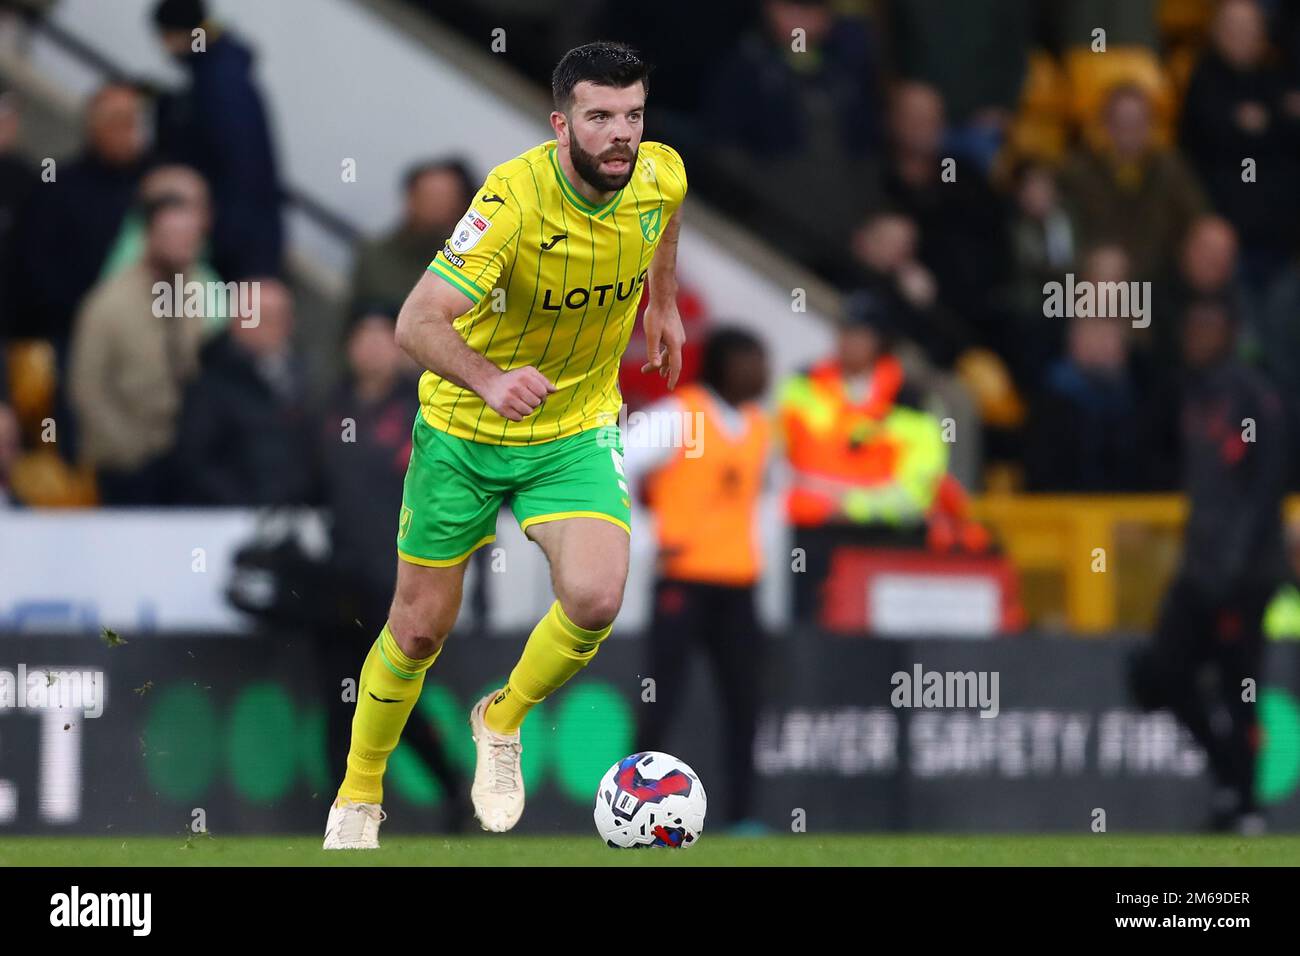 Grant Hanley of Norwich City - Norwich City v Watford, Sky Bet Championship, Carrow Road, Norwich, UK - 2nd January 2022  Editorial Use Only - DataCo restrictions apply Stock Photo